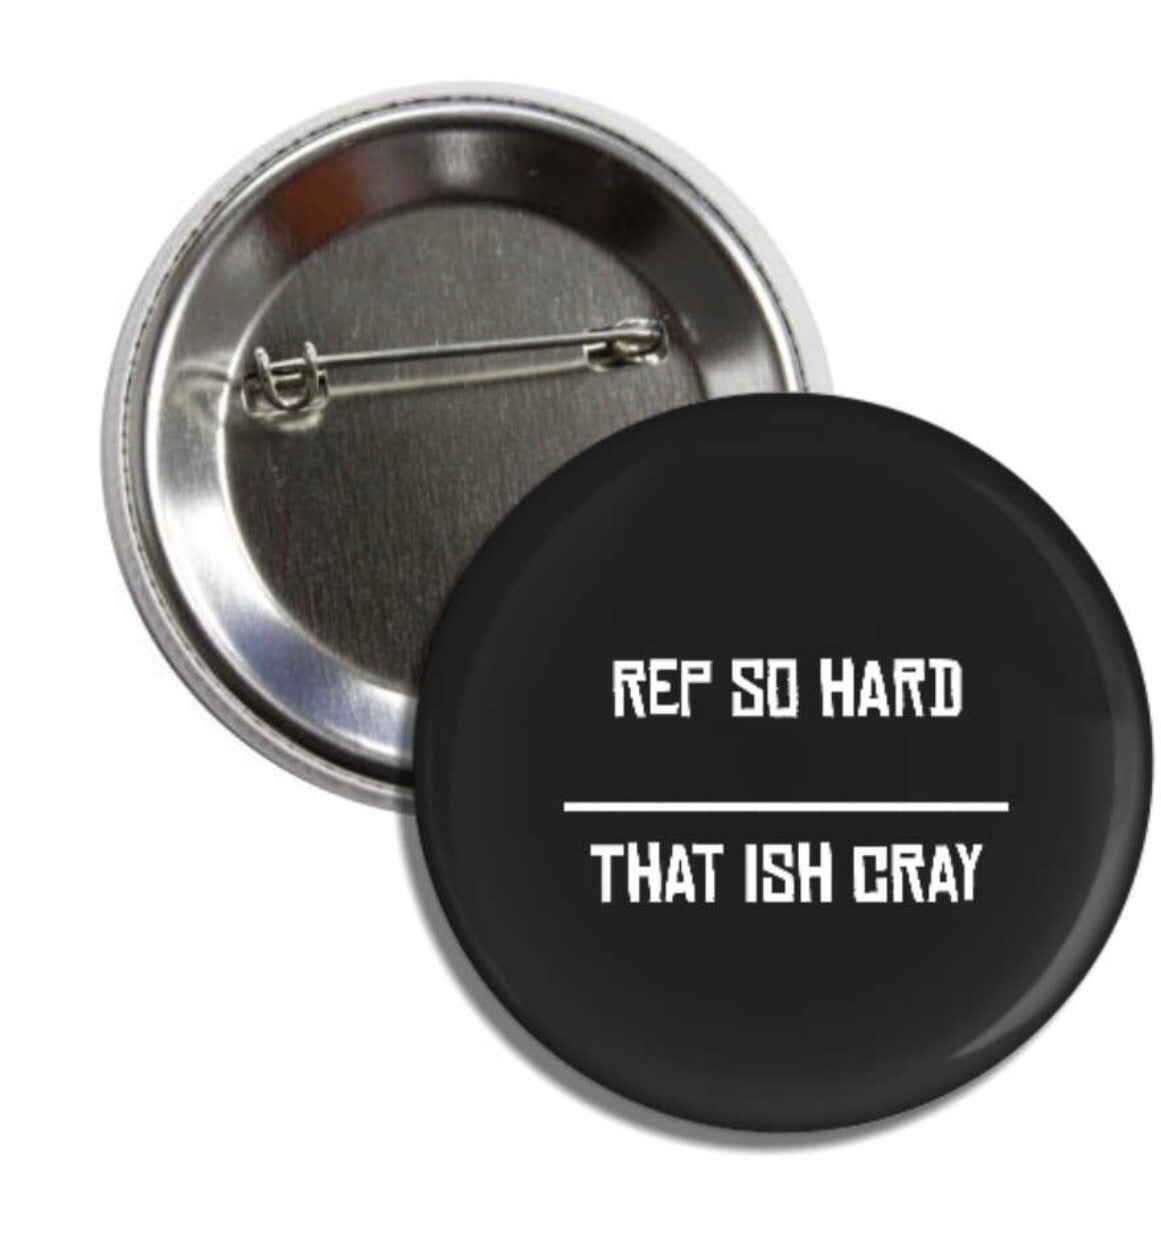 Rep so hard- that ish cray button